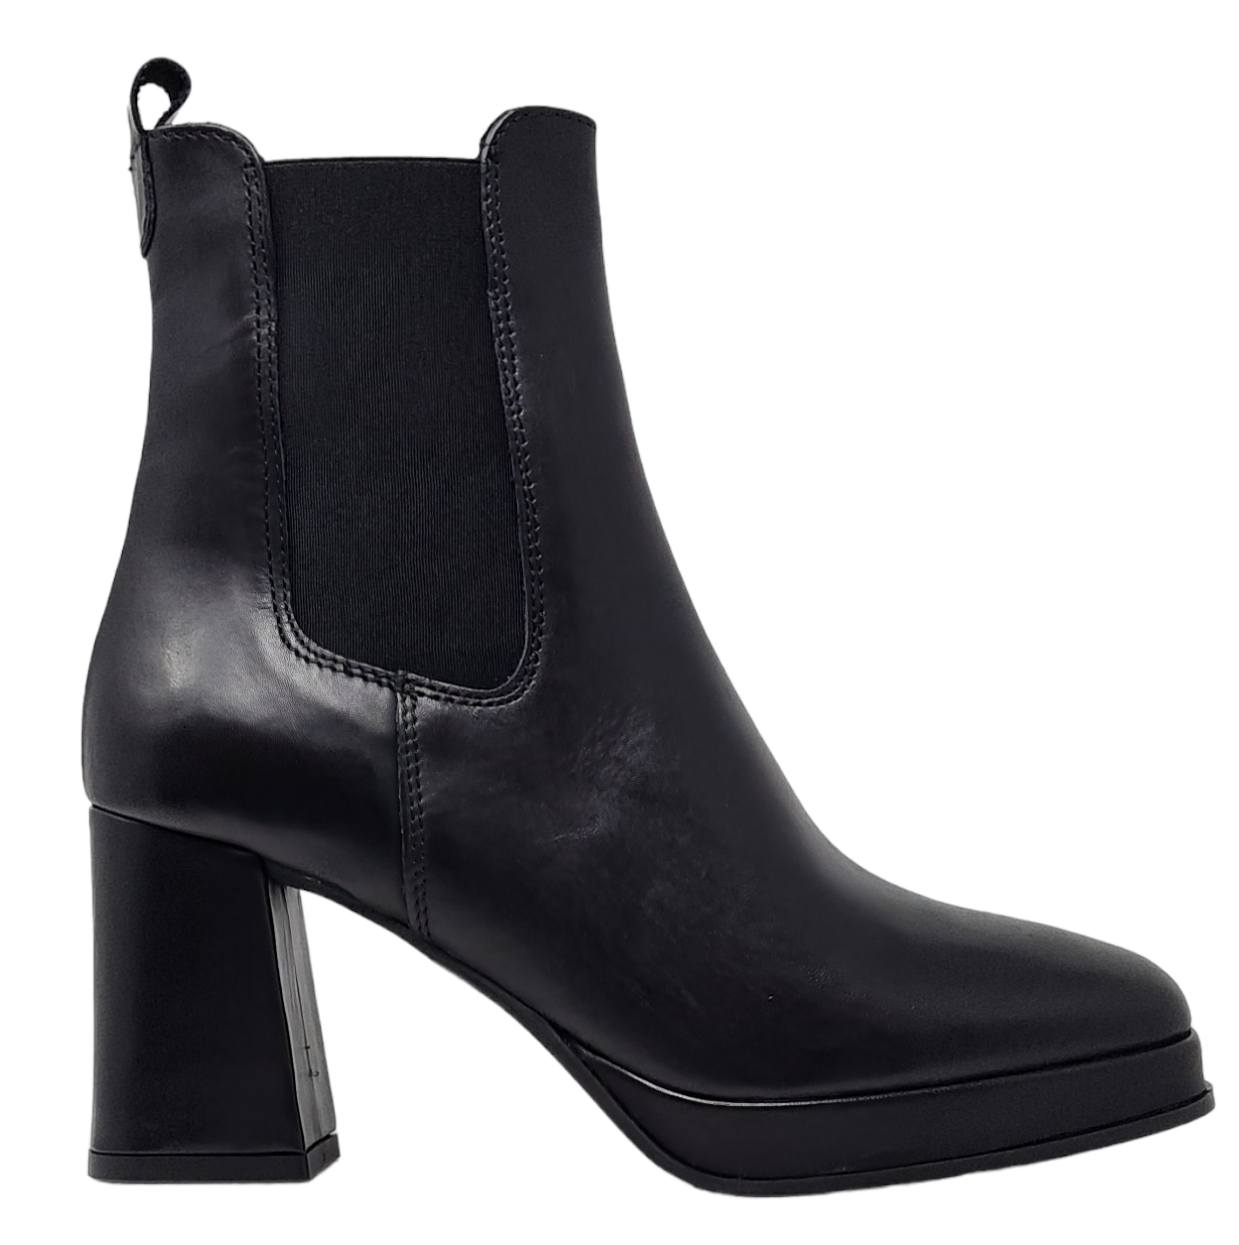 AT714 Women's Ankle Boot